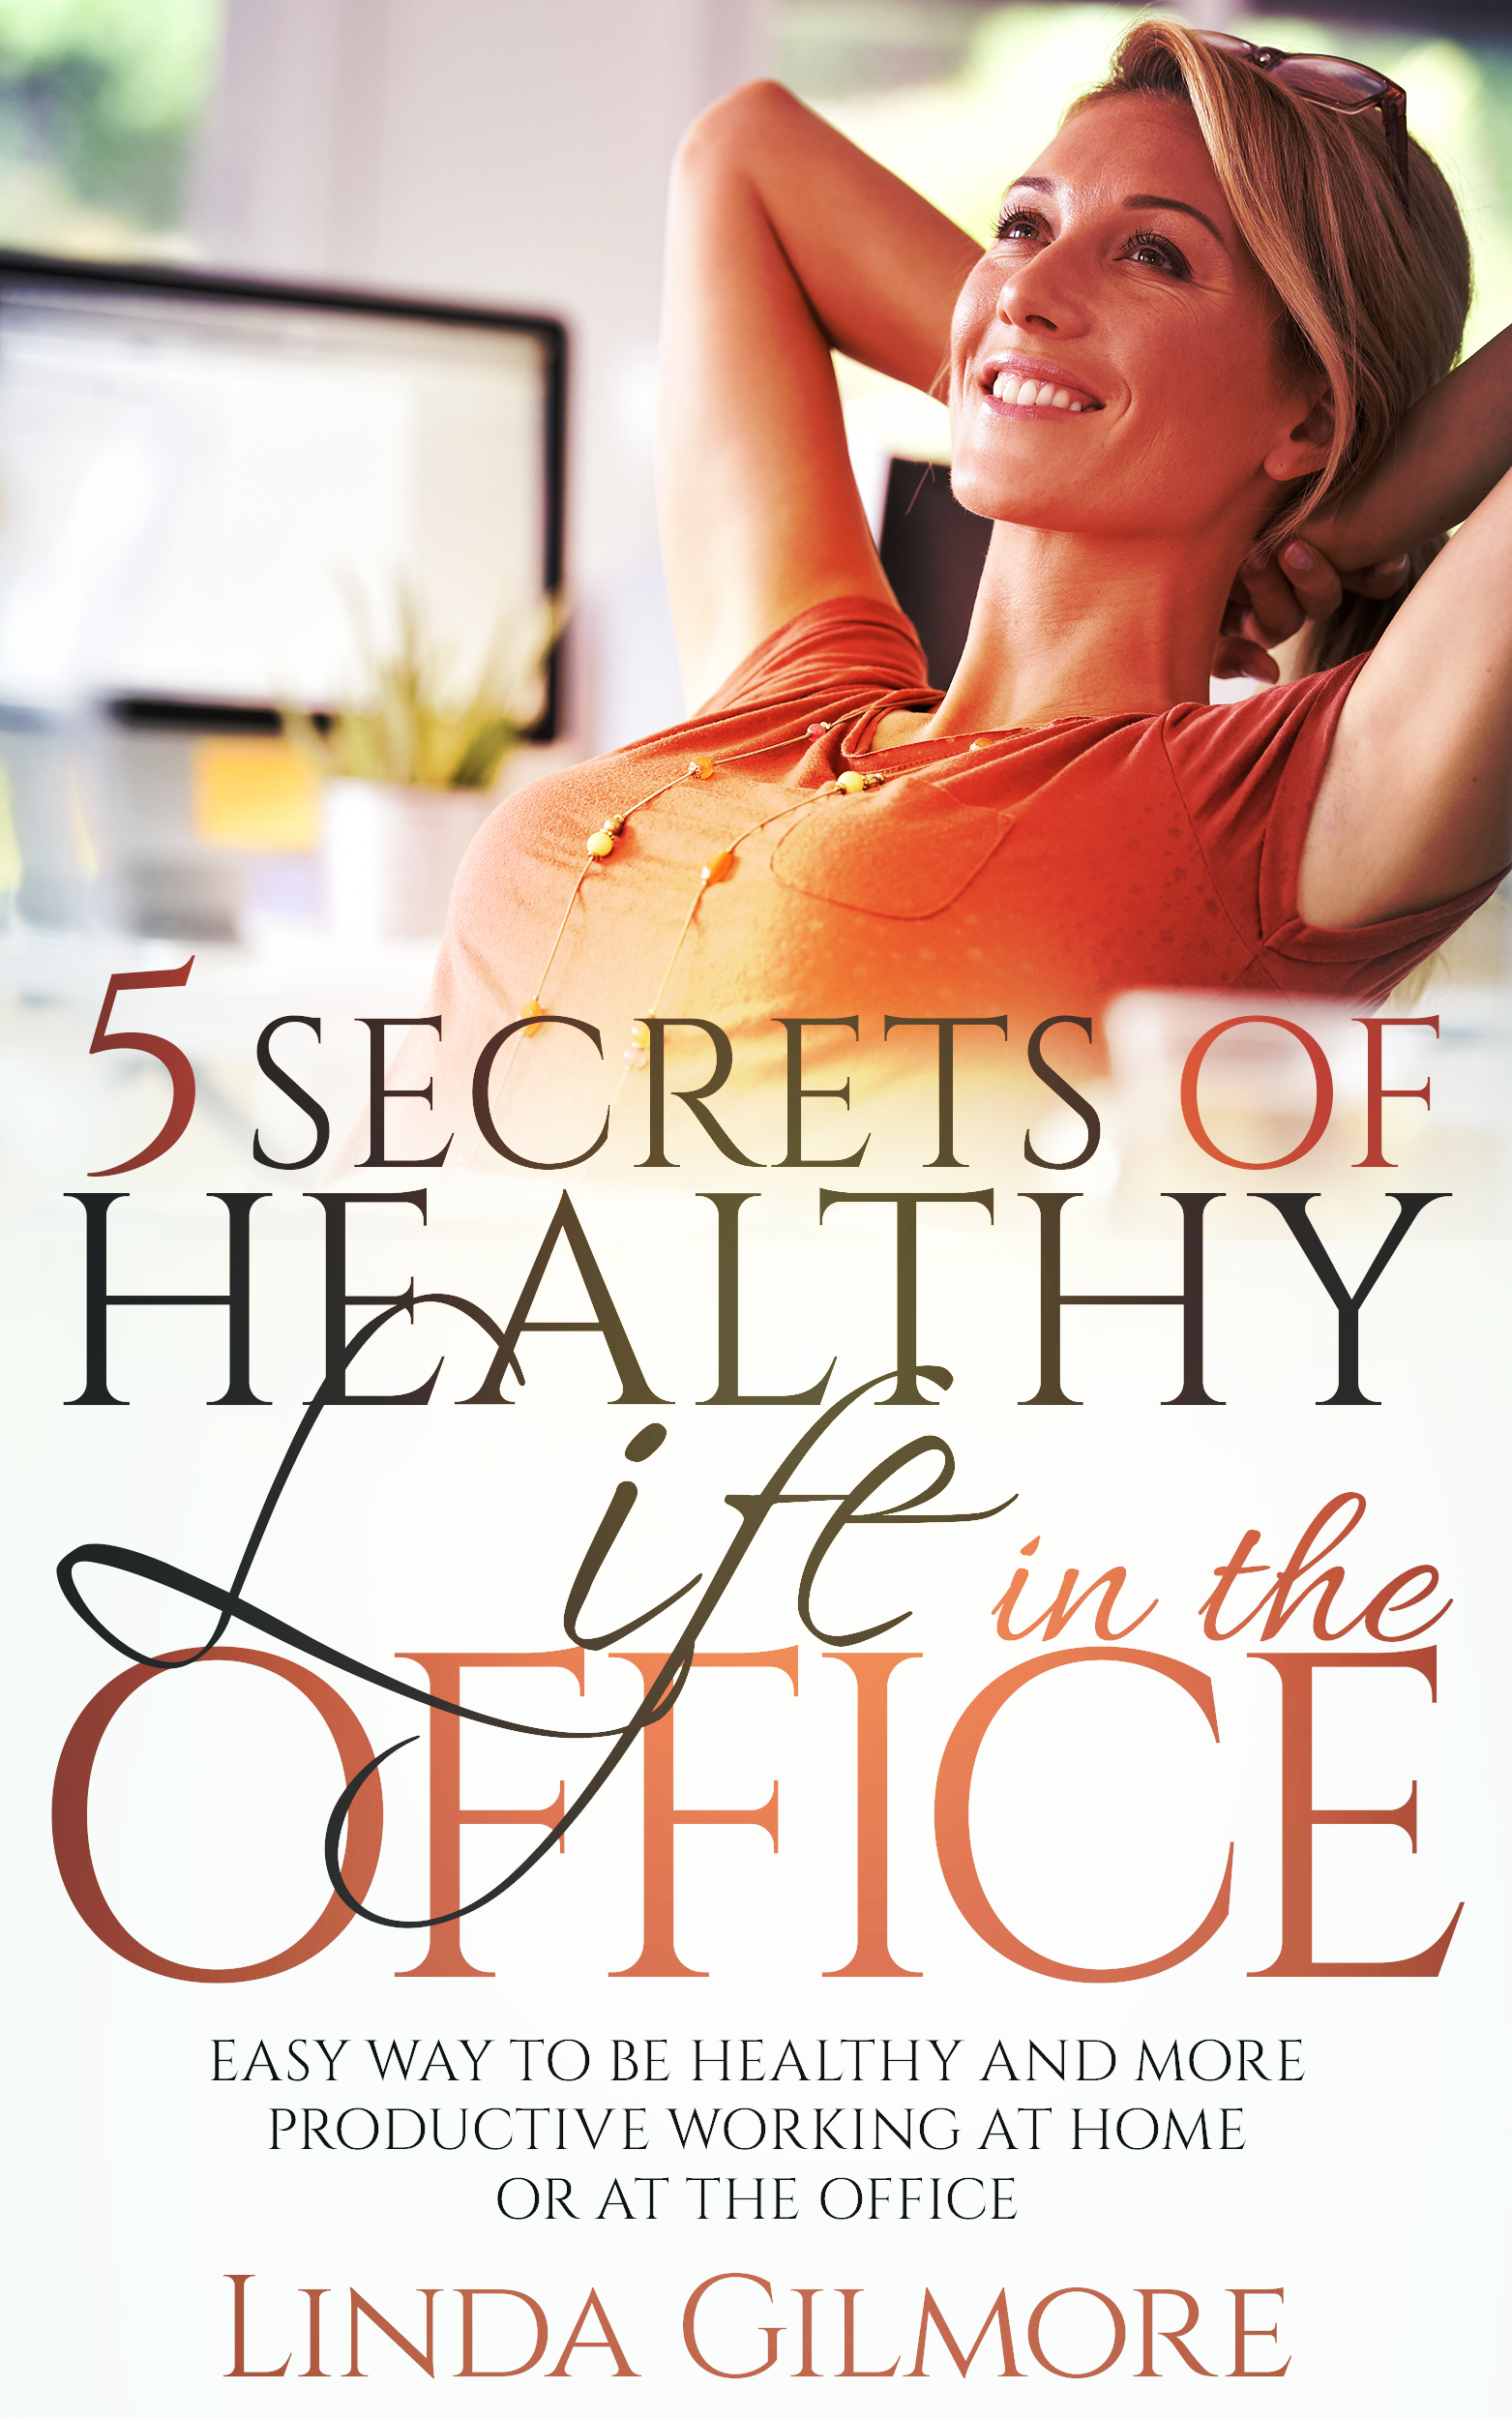 FREE: 5 SECRETS OF HEALTHY LIFE IN THE OFFICE: Easy Way to Be Healthy and More Productive Working at Home or at the Office by Linda Gilmore